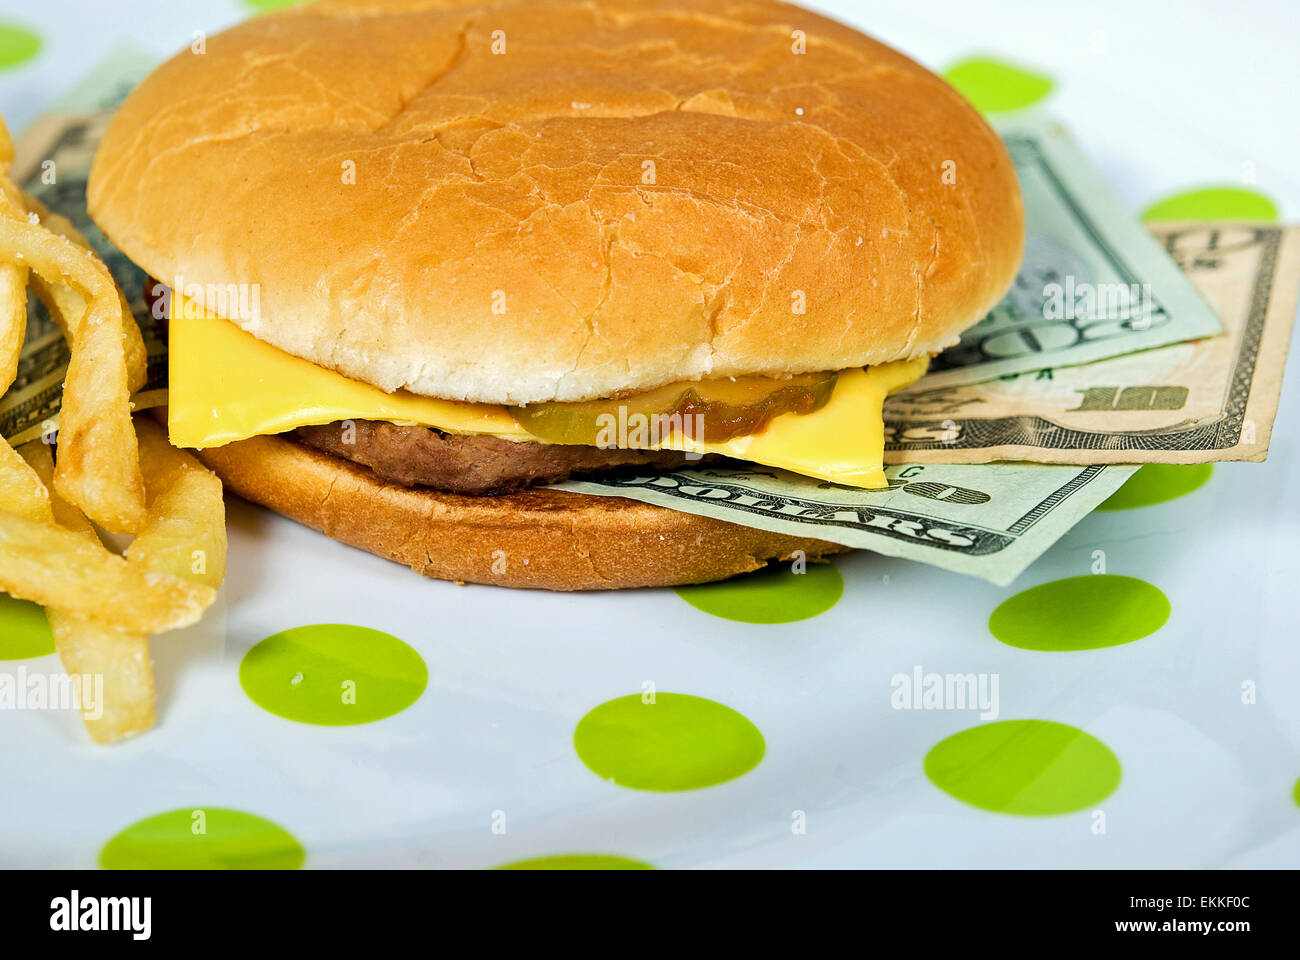 American money in a cheeseburger on a green polka dot plate. Stock Photo